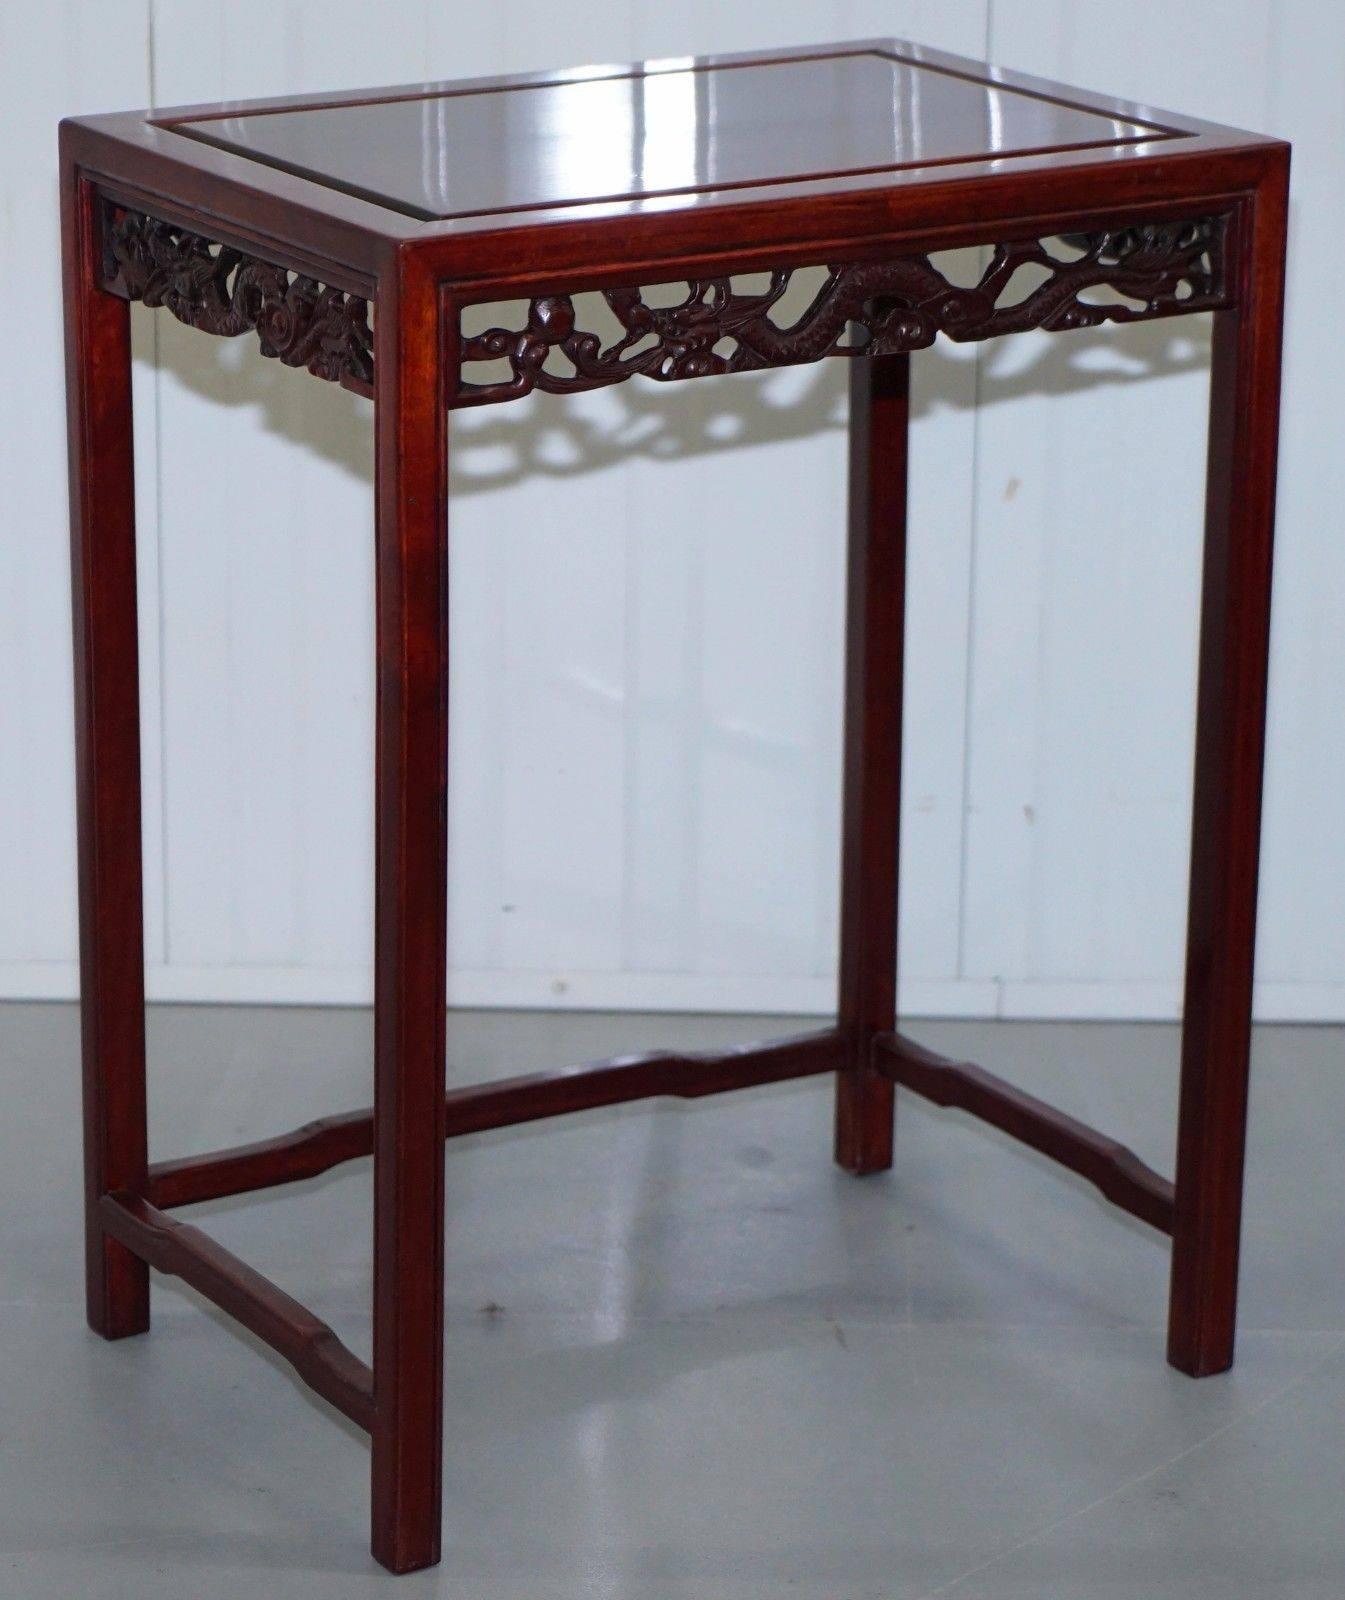 Wimbledon-Furniture

Wimbledon-Furniture is delighted to offer for auction this stunning nest of four Chinese solid Teak finely hand carved with Dragon detailing nest of tables

Please scroll all the way to the bottom of the description for